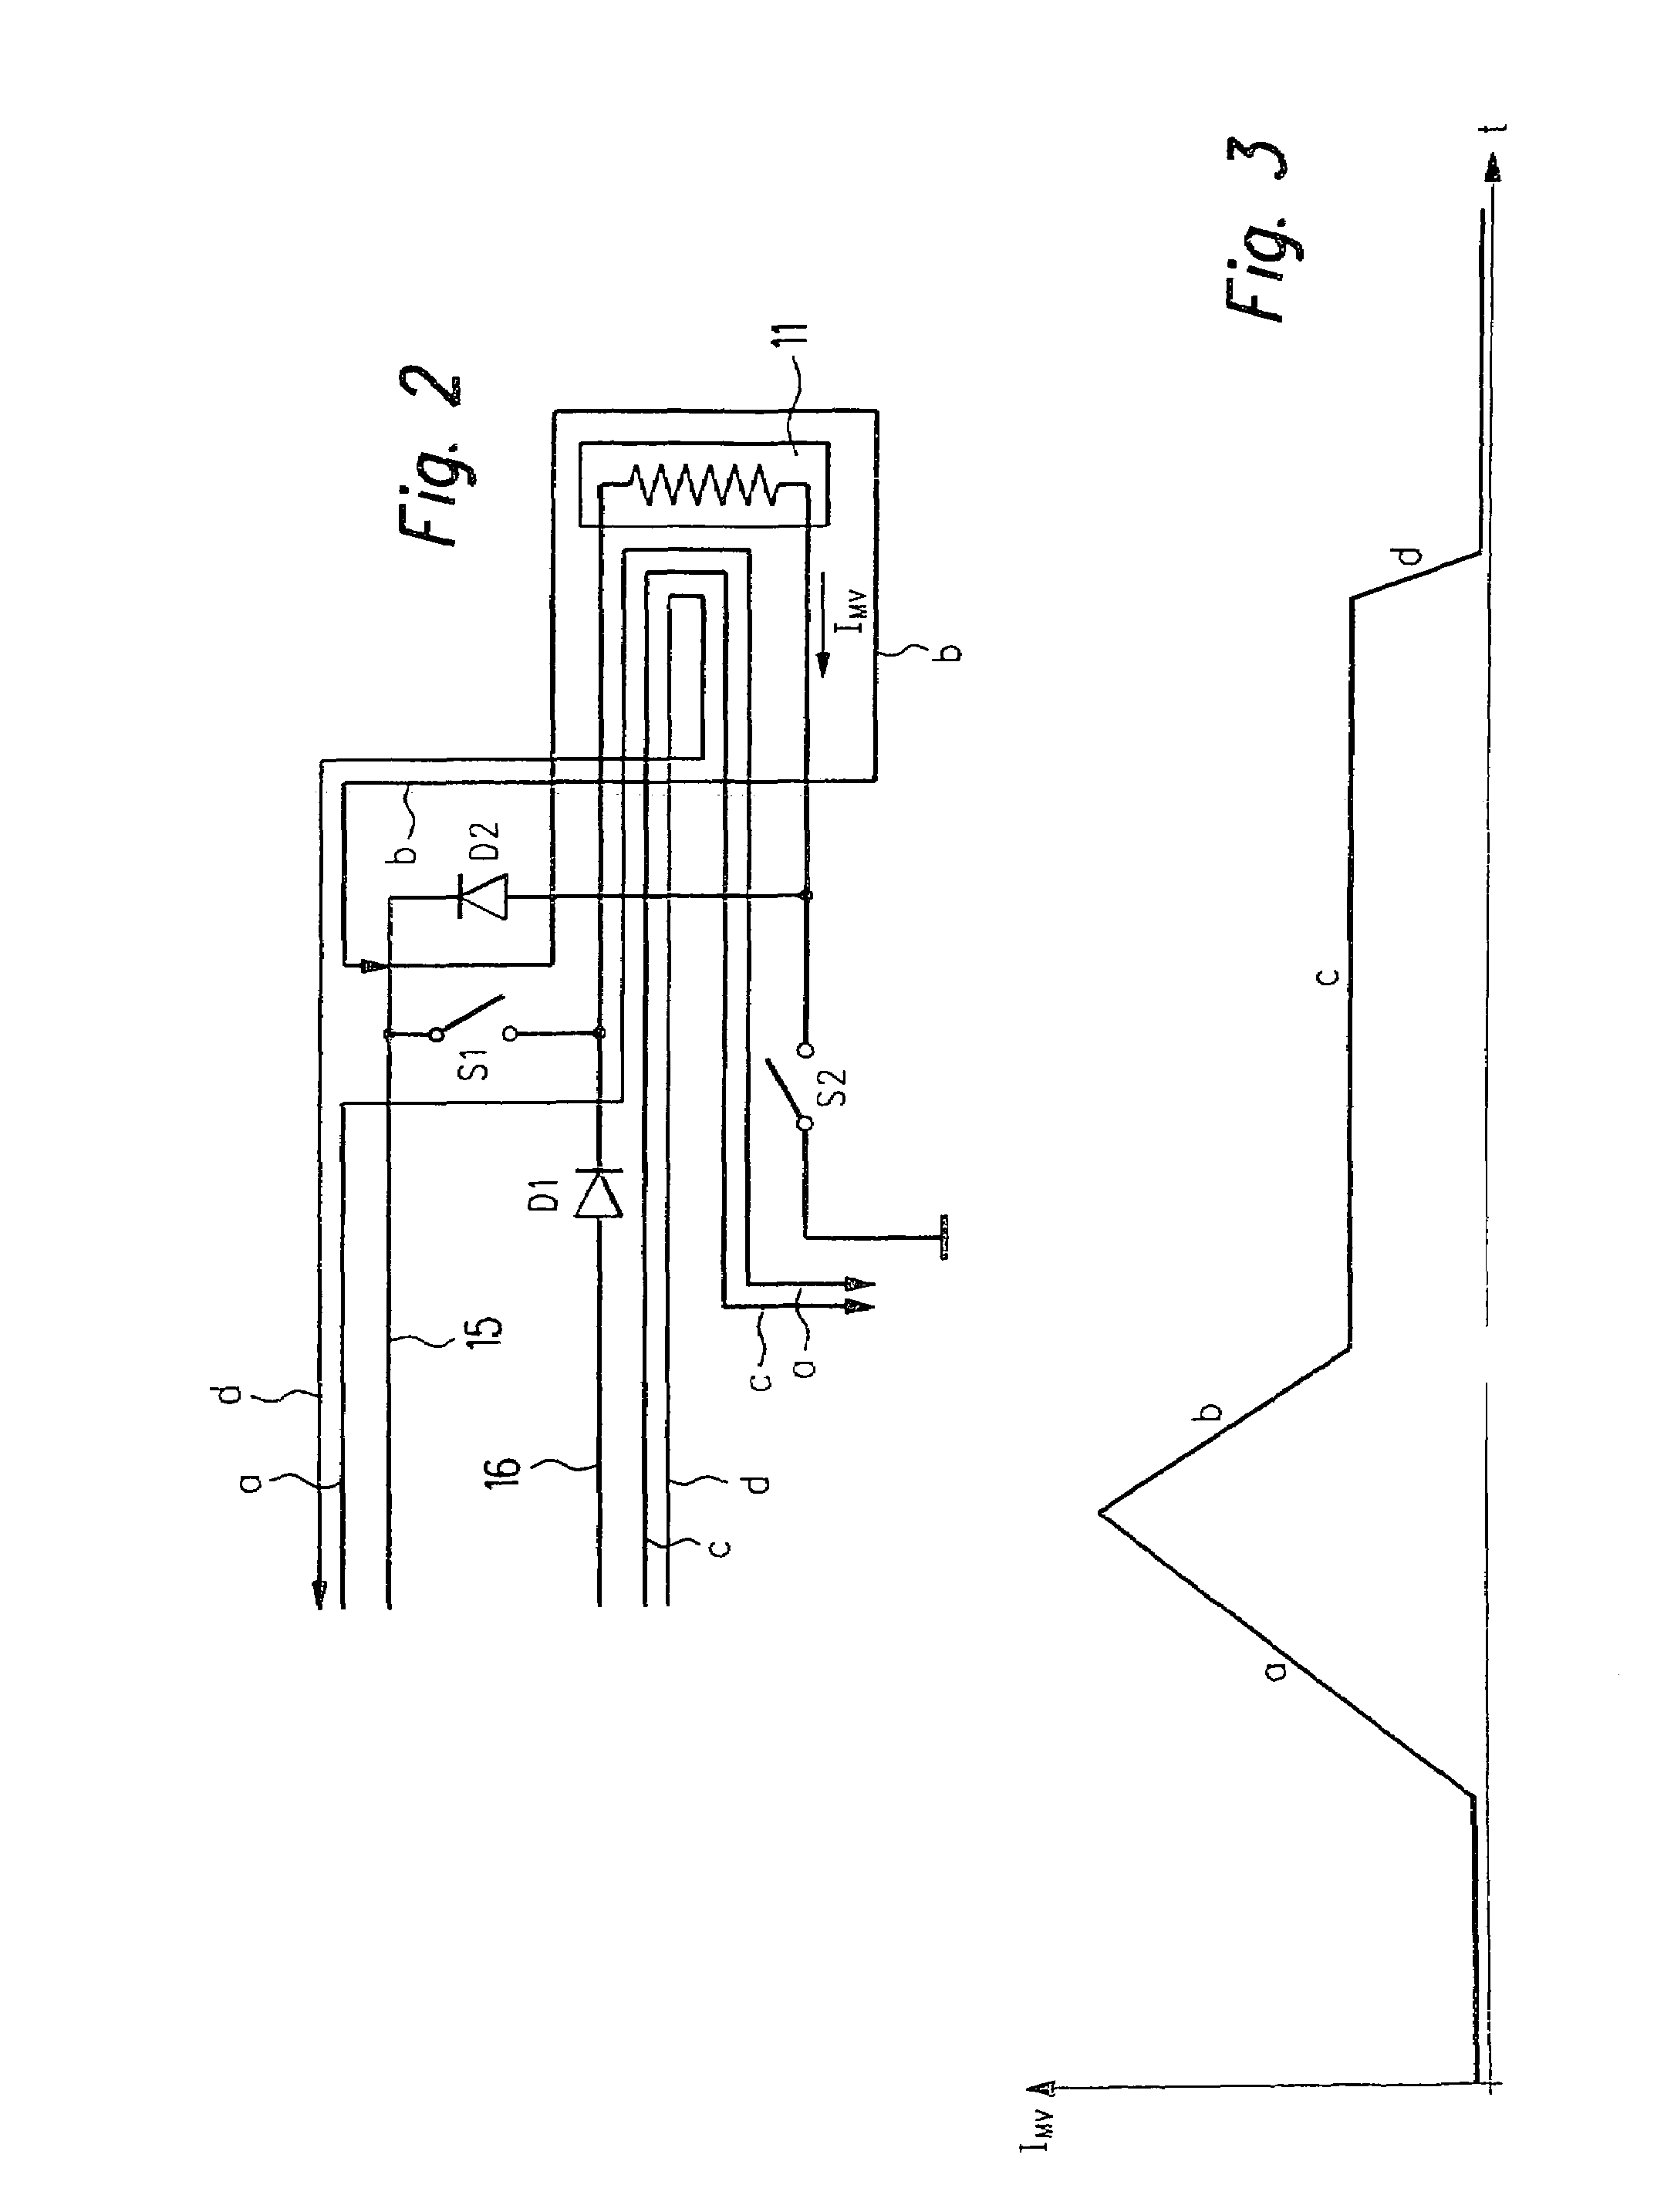 Method for monitoring at least two electromagnetic valves of an internal combustion engine, especially an internal combustion engine of a motor vehicle in particular